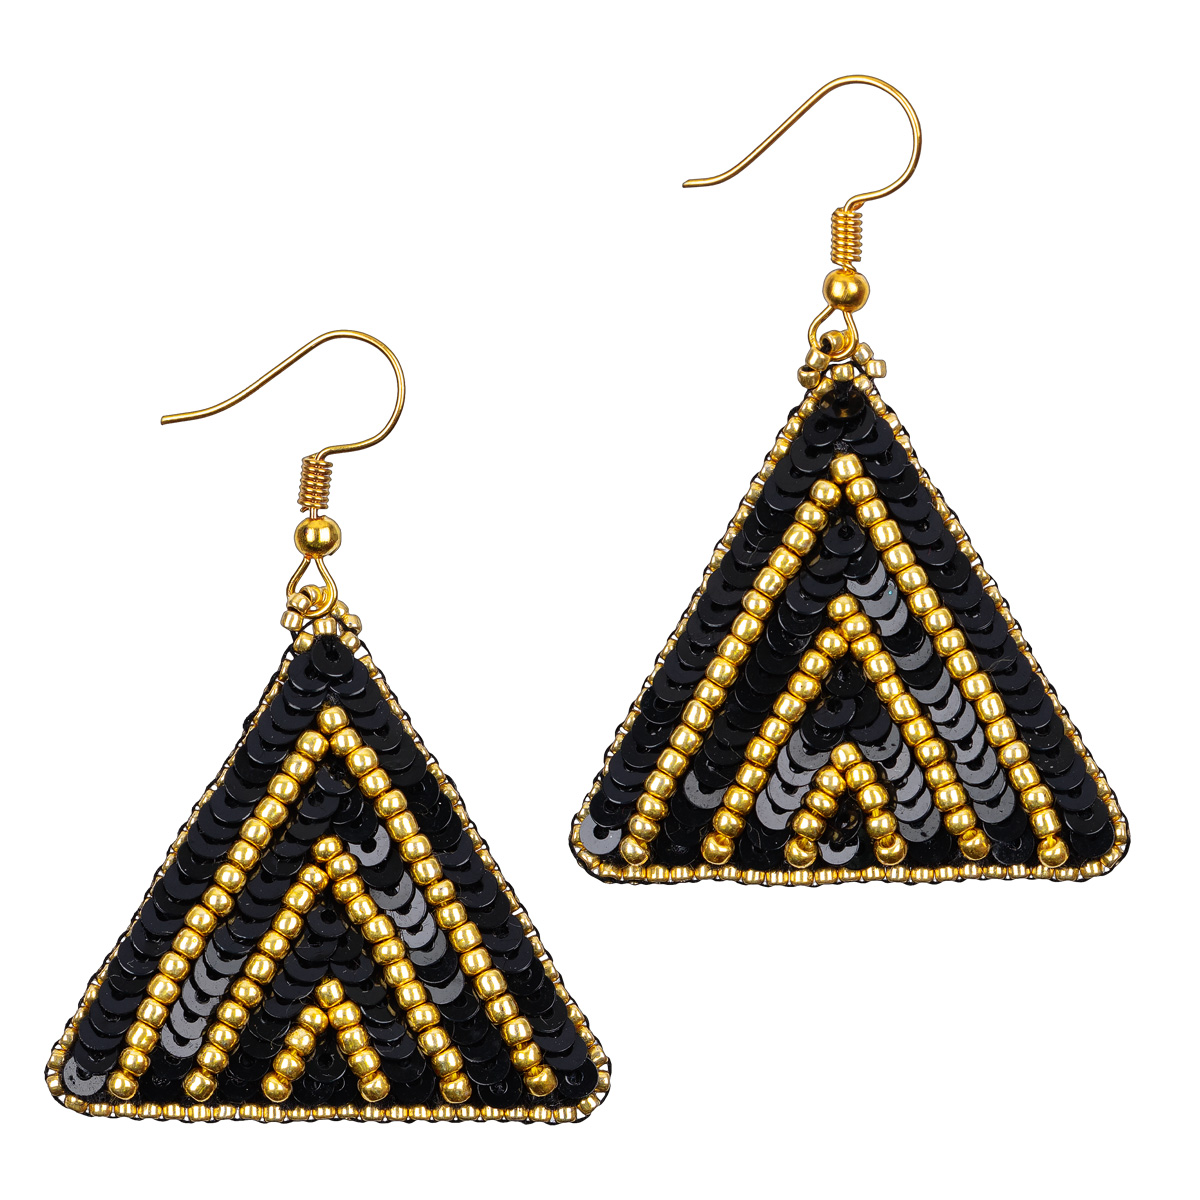 Embroidery kits PANNA 10-510 Triangle Earrings. Gold ornament 